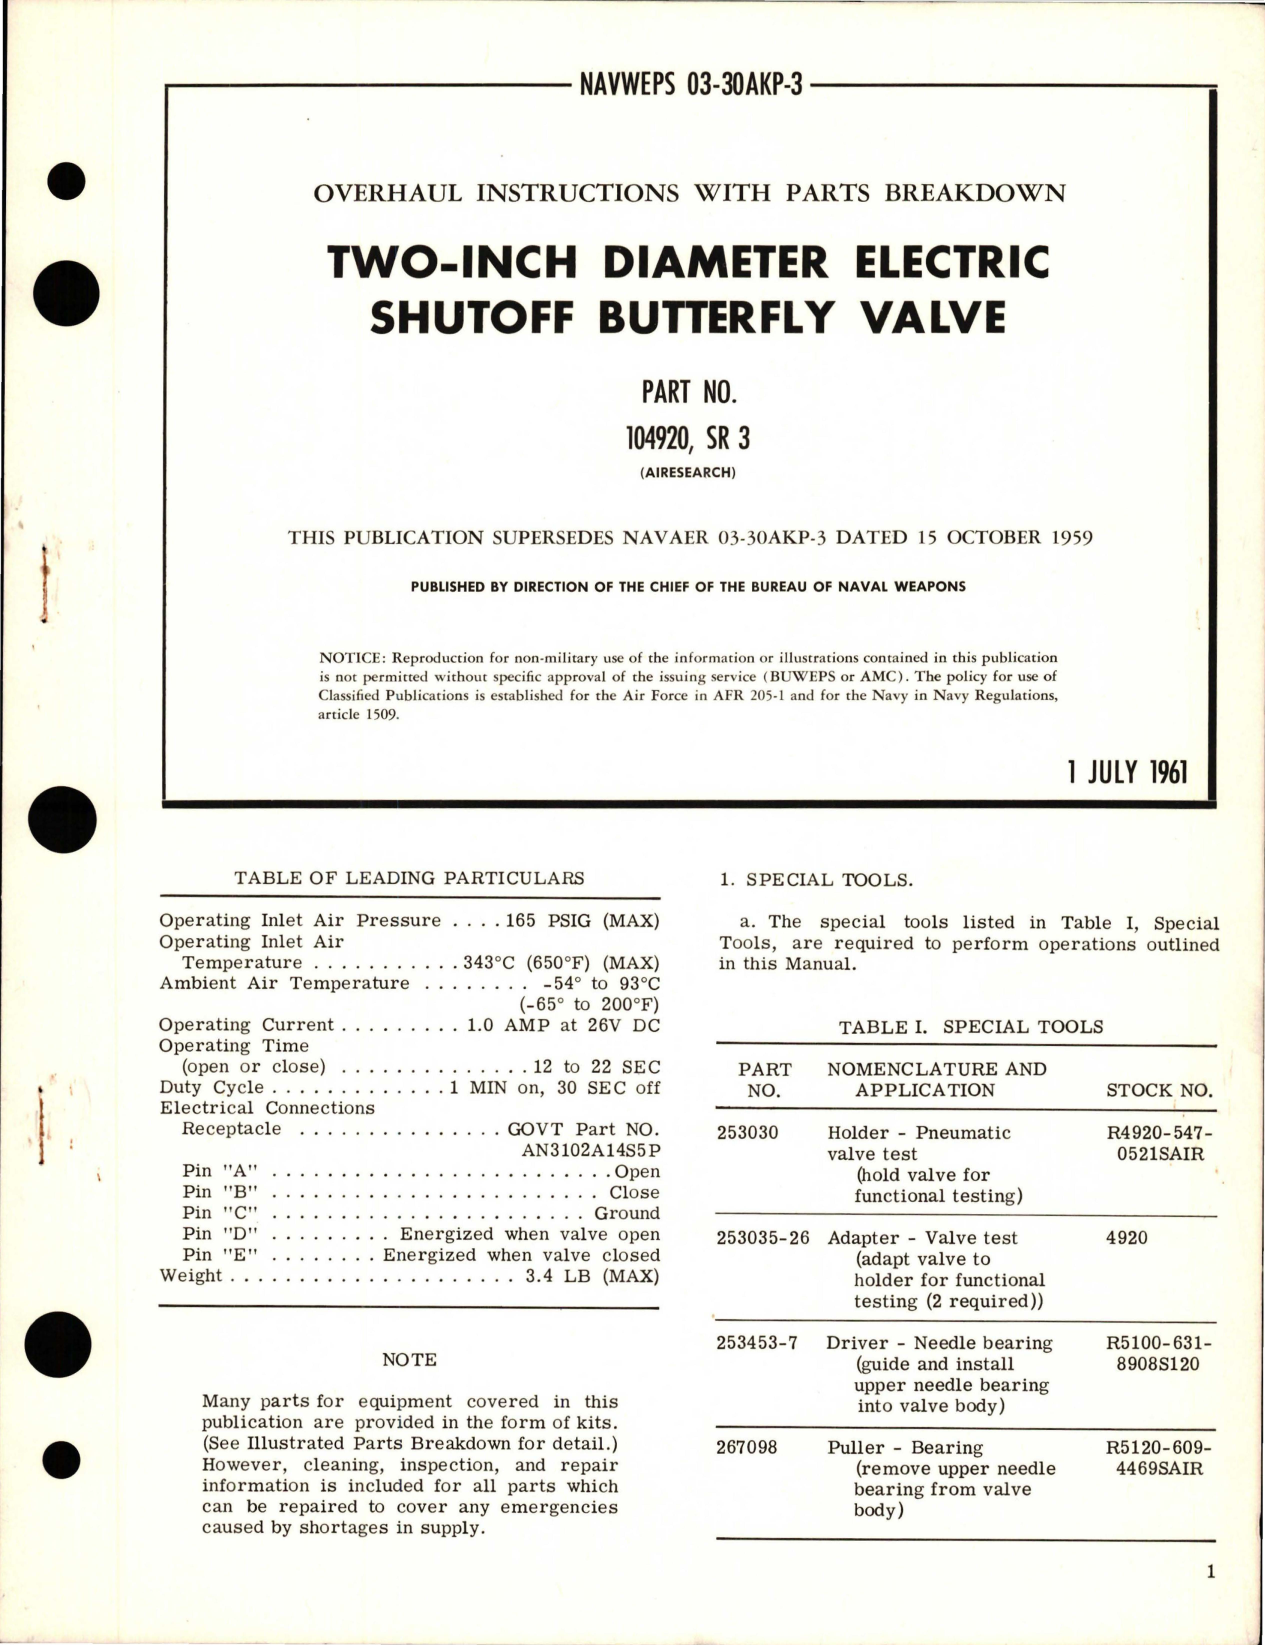 Sample page 1 from AirCorps Library document: Overhaul Instructions with Parts Breakdown for Electric Shutoff Butterfly Valve - 2 inch Diameter - Part 104920, SR 3